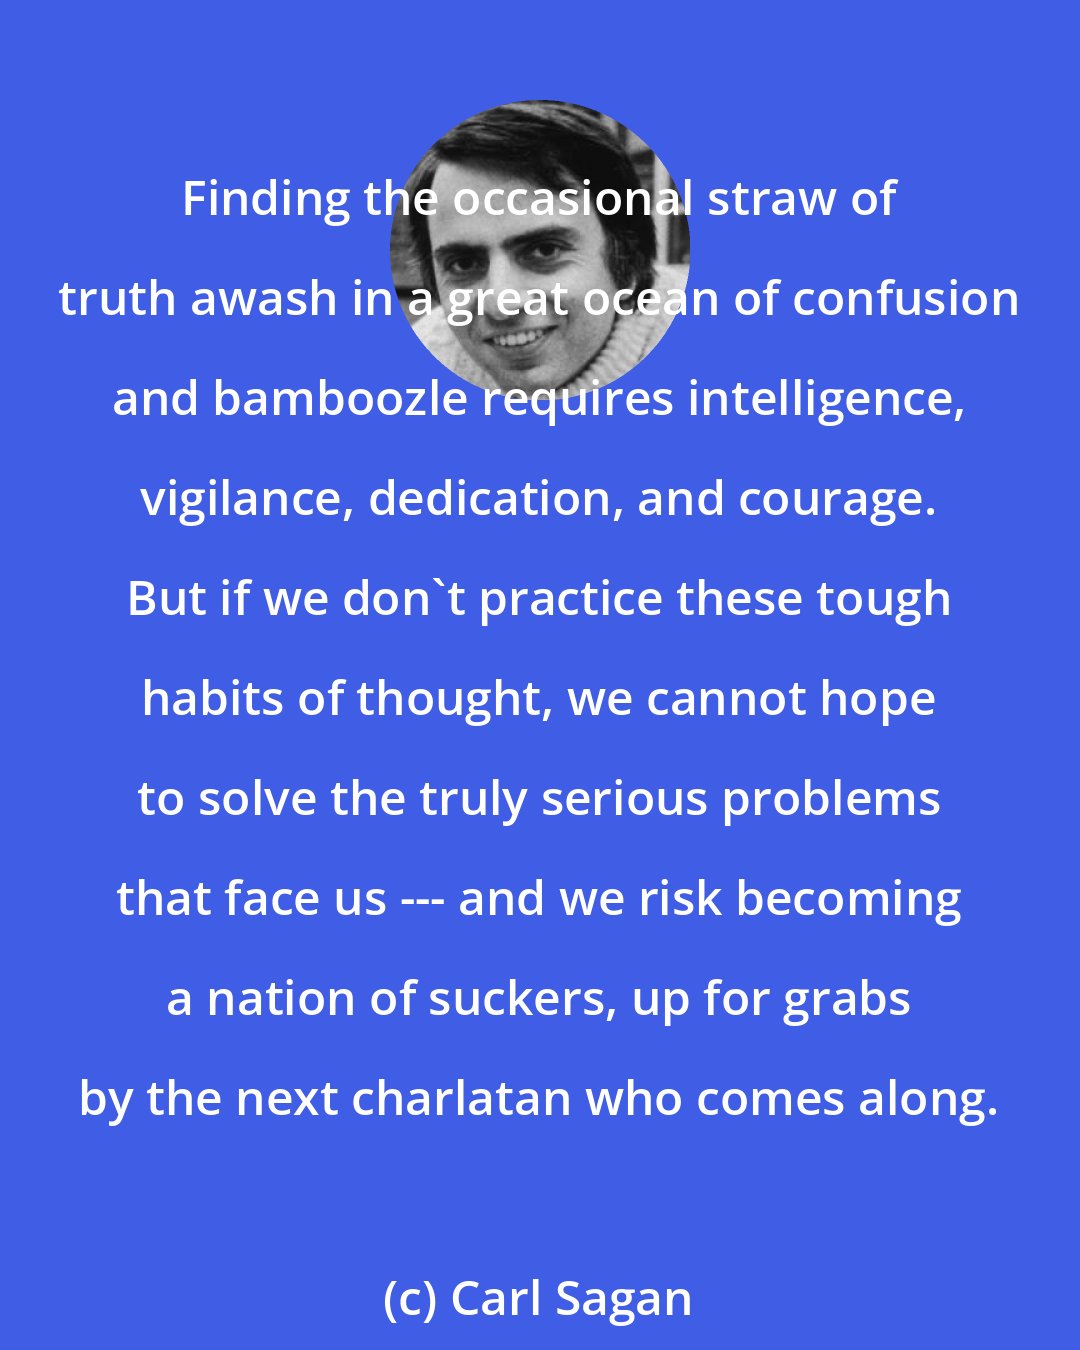 Carl Sagan: Finding the occasional straw of truth awash in a great ocean of confusion and bamboozle requires intelligence, vigilance, dedication, and courage. But if we don't practice these tough habits of thought, we cannot hope to solve the truly serious problems that face us --- and we risk becoming a nation of suckers, up for grabs by the next charlatan who comes along.